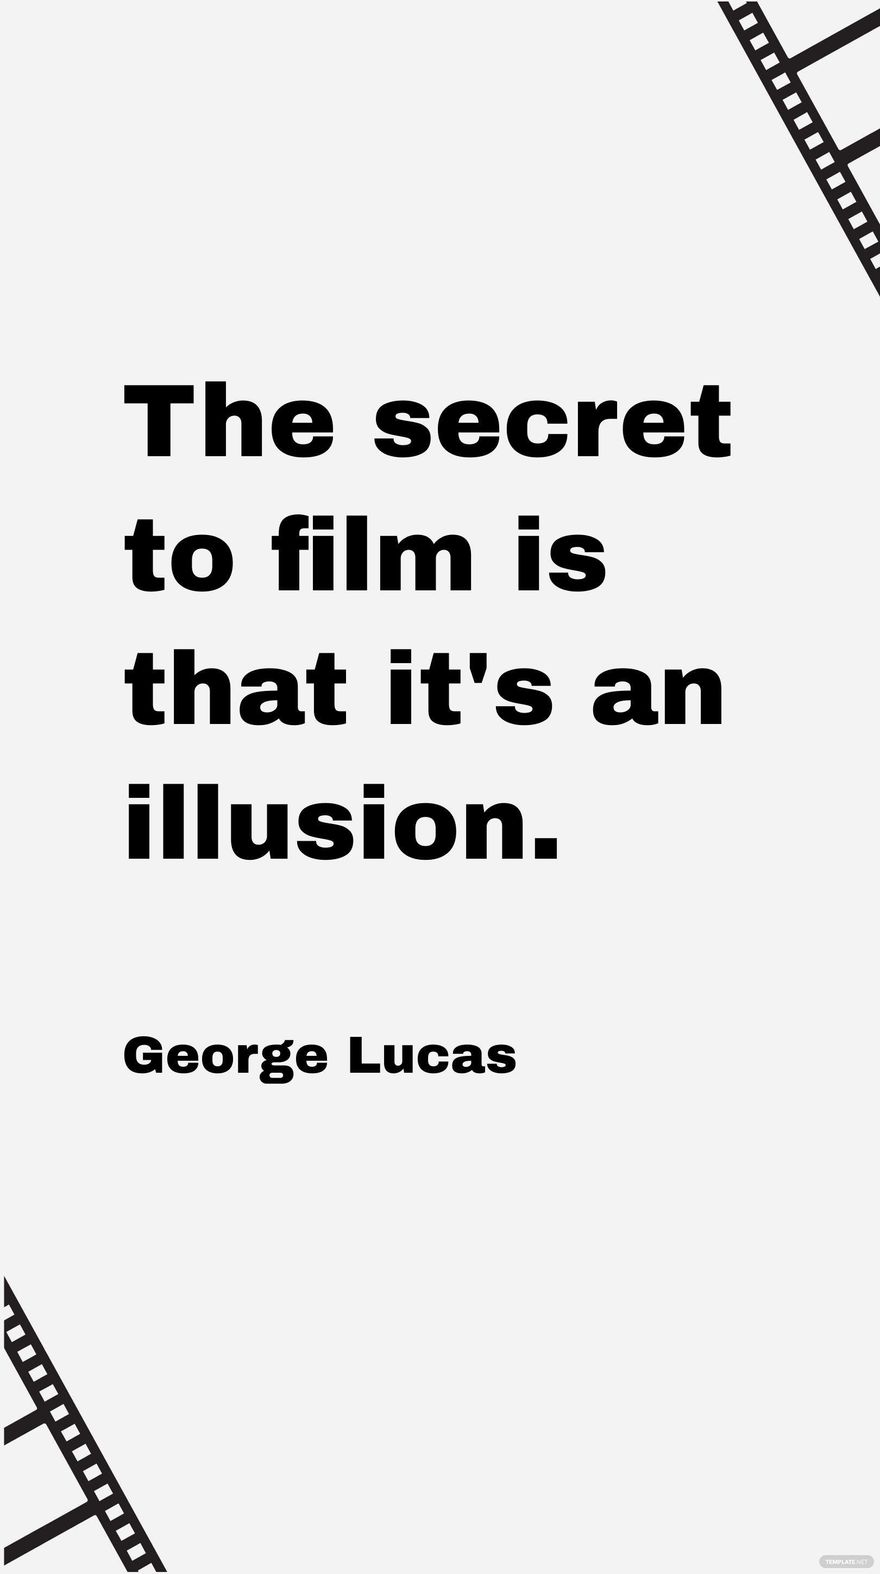 George Lucas - The secret to film is that it's an illusion. in JPG